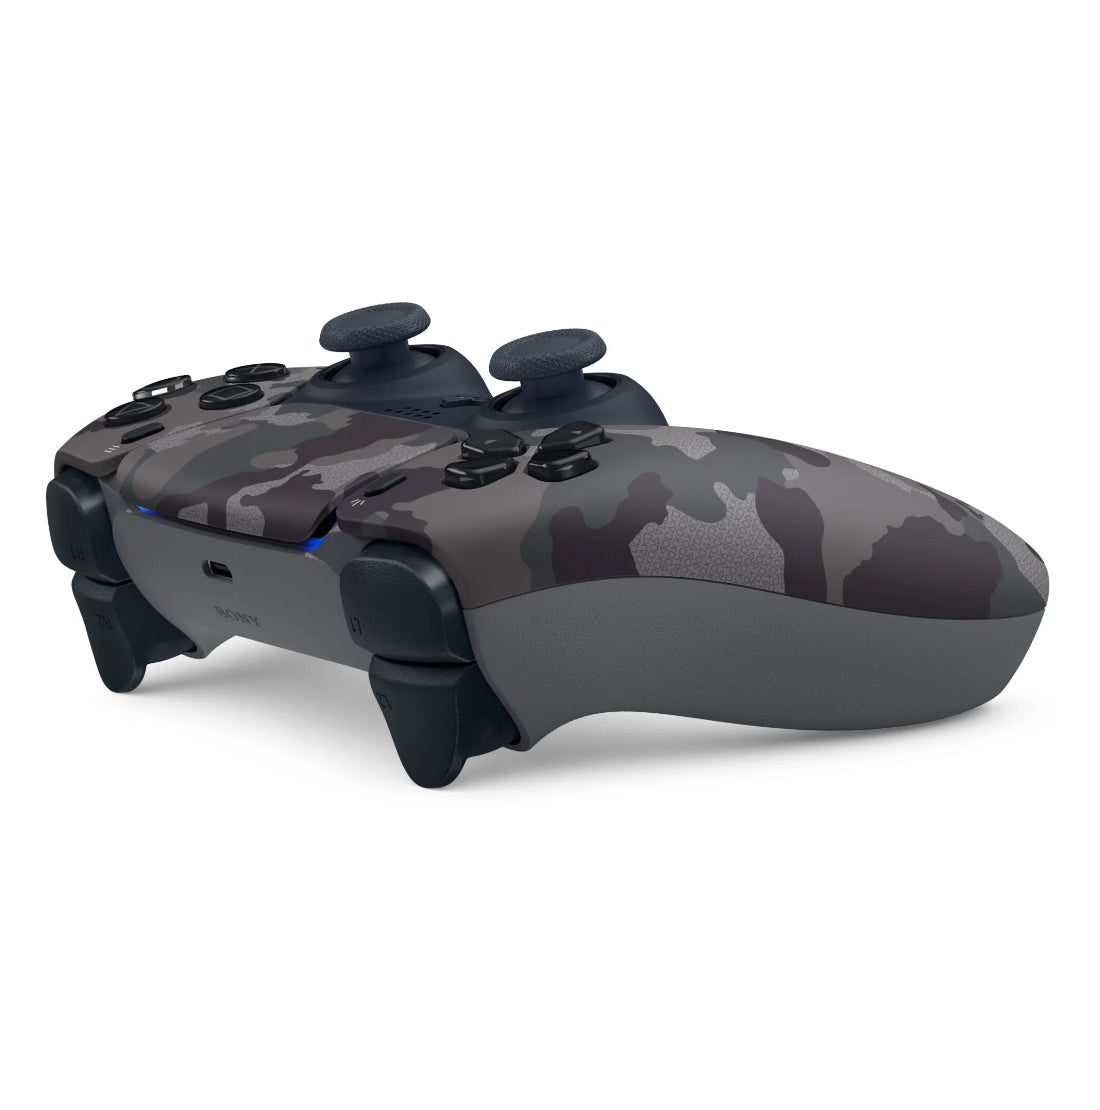 Sony Playstation 5 Disc Edition Bundle with Extra Gray Camo Controller, Black PULSE 3D Wireless Headset and QuickType Keypad - Pro-Distributing